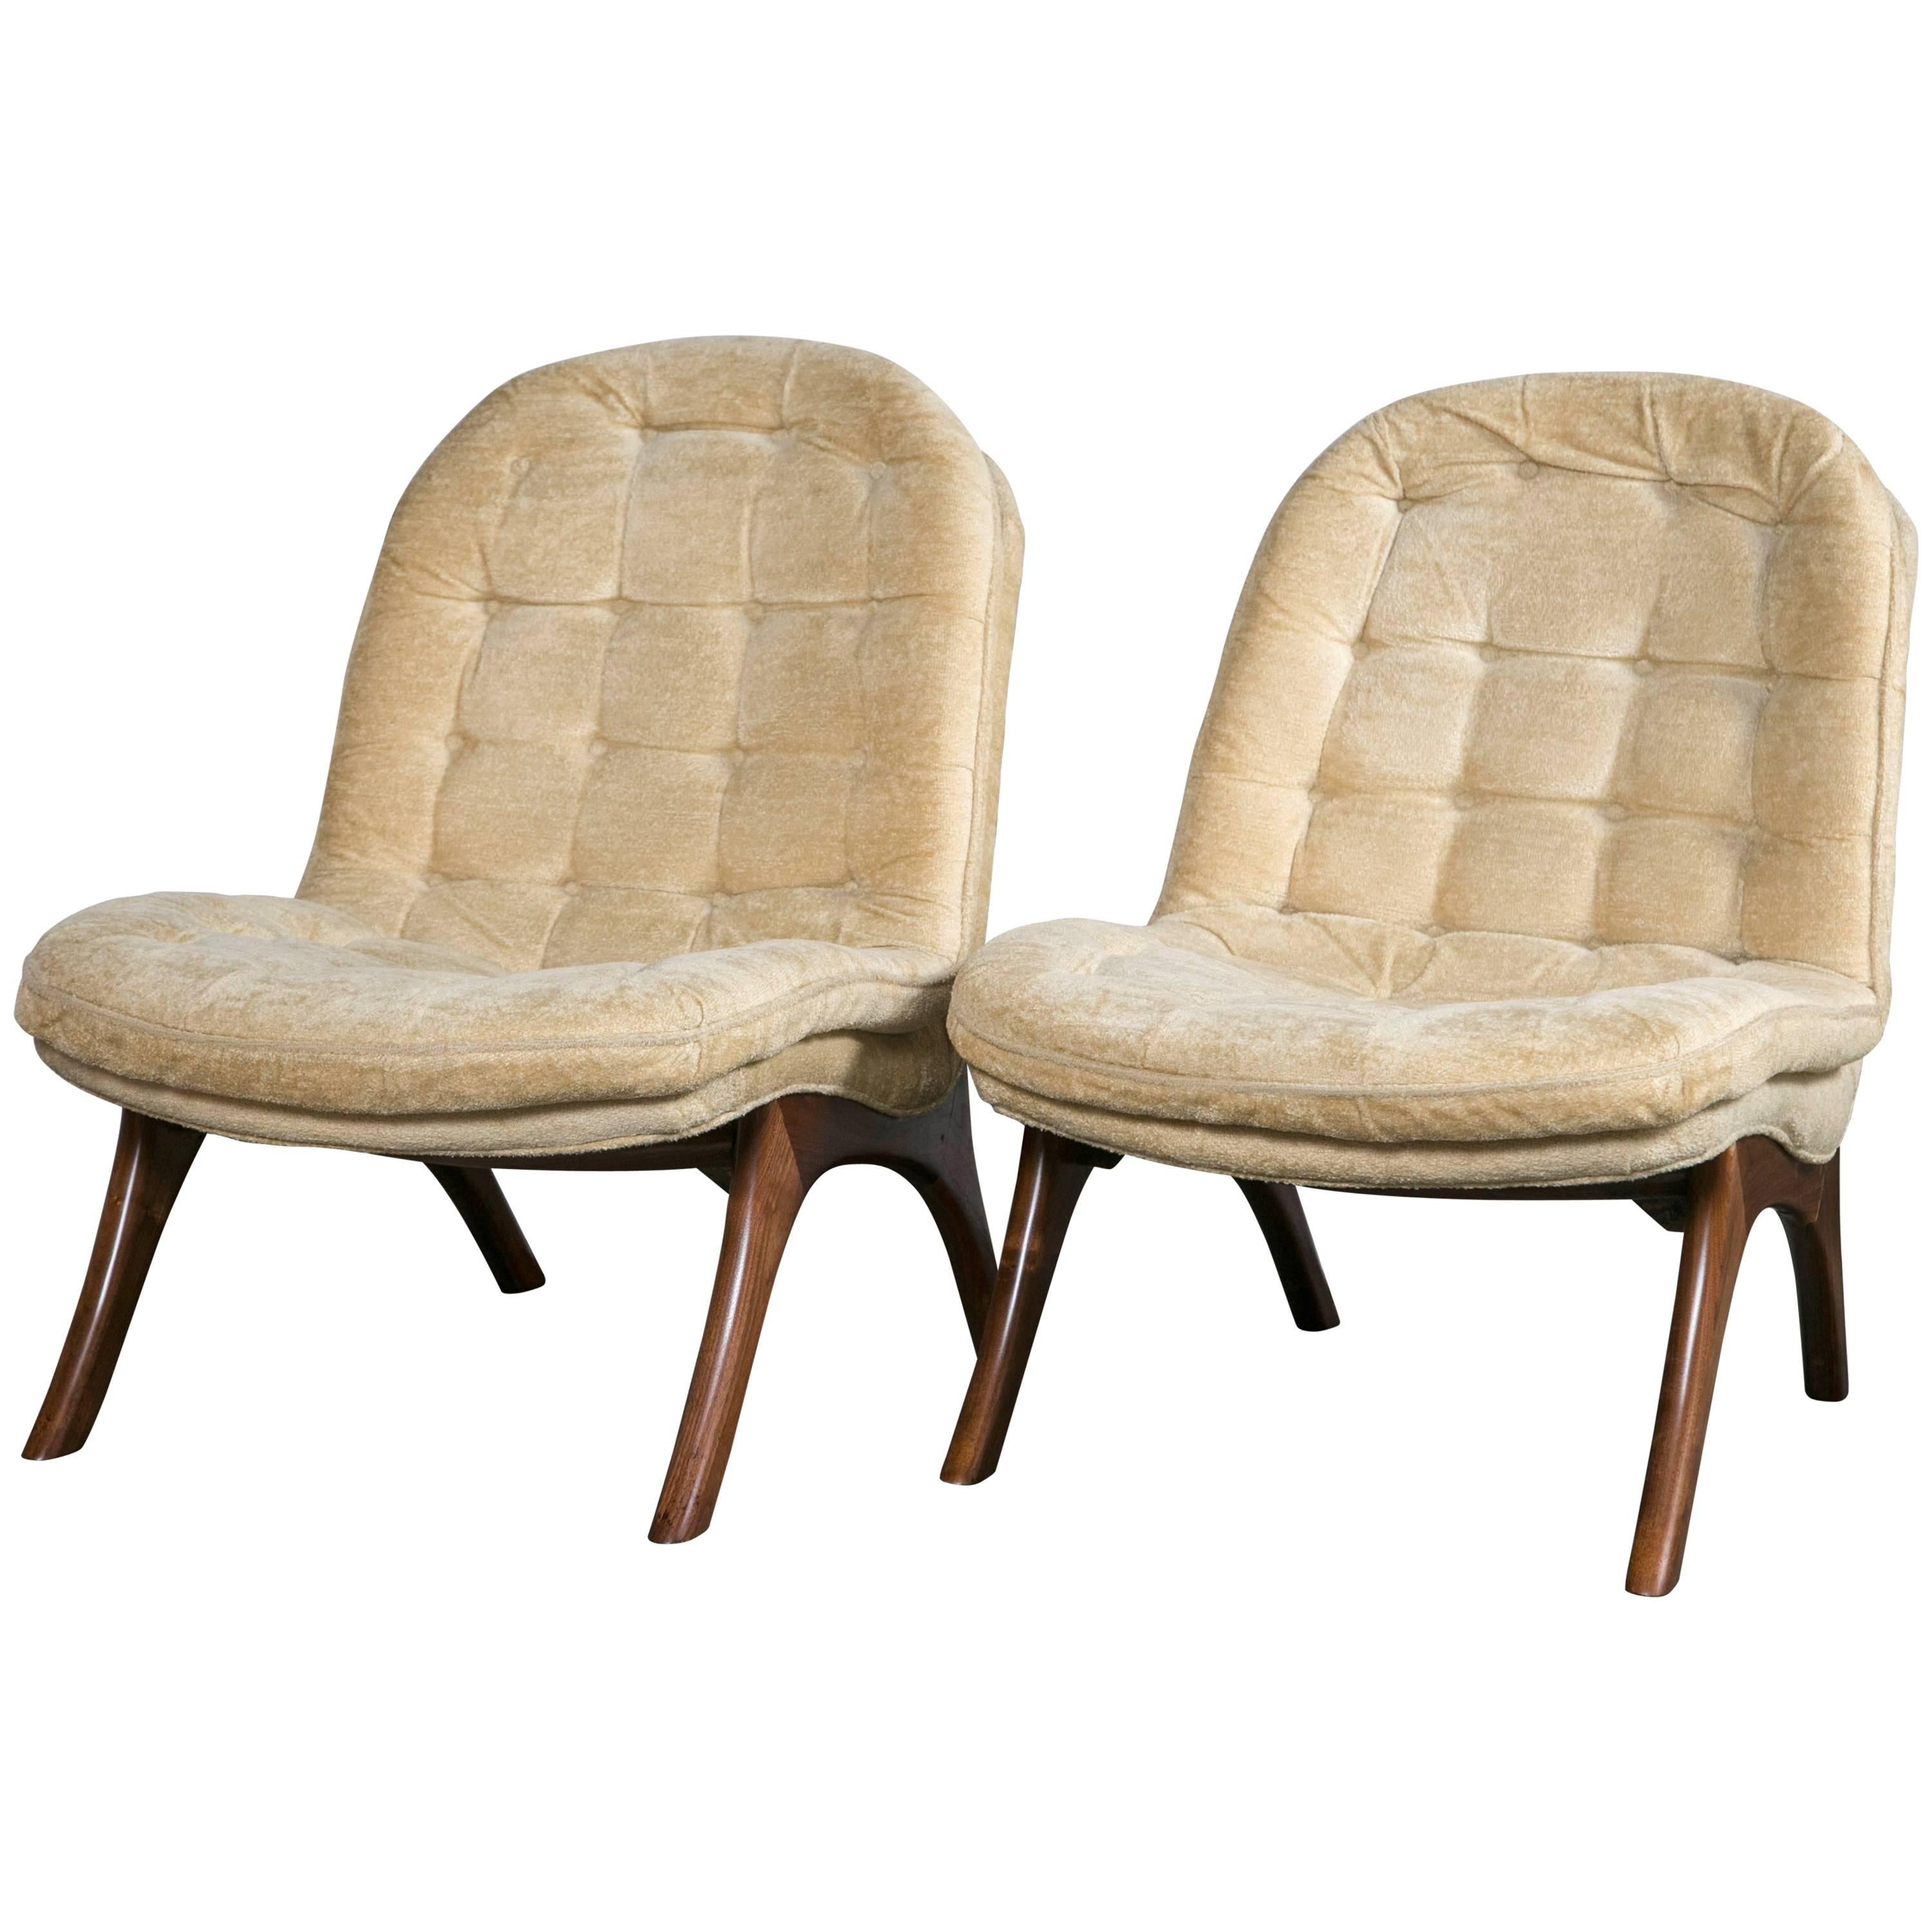 Pair of Adrian Pearsall for Craft Associates Slipper Chairs For Sale